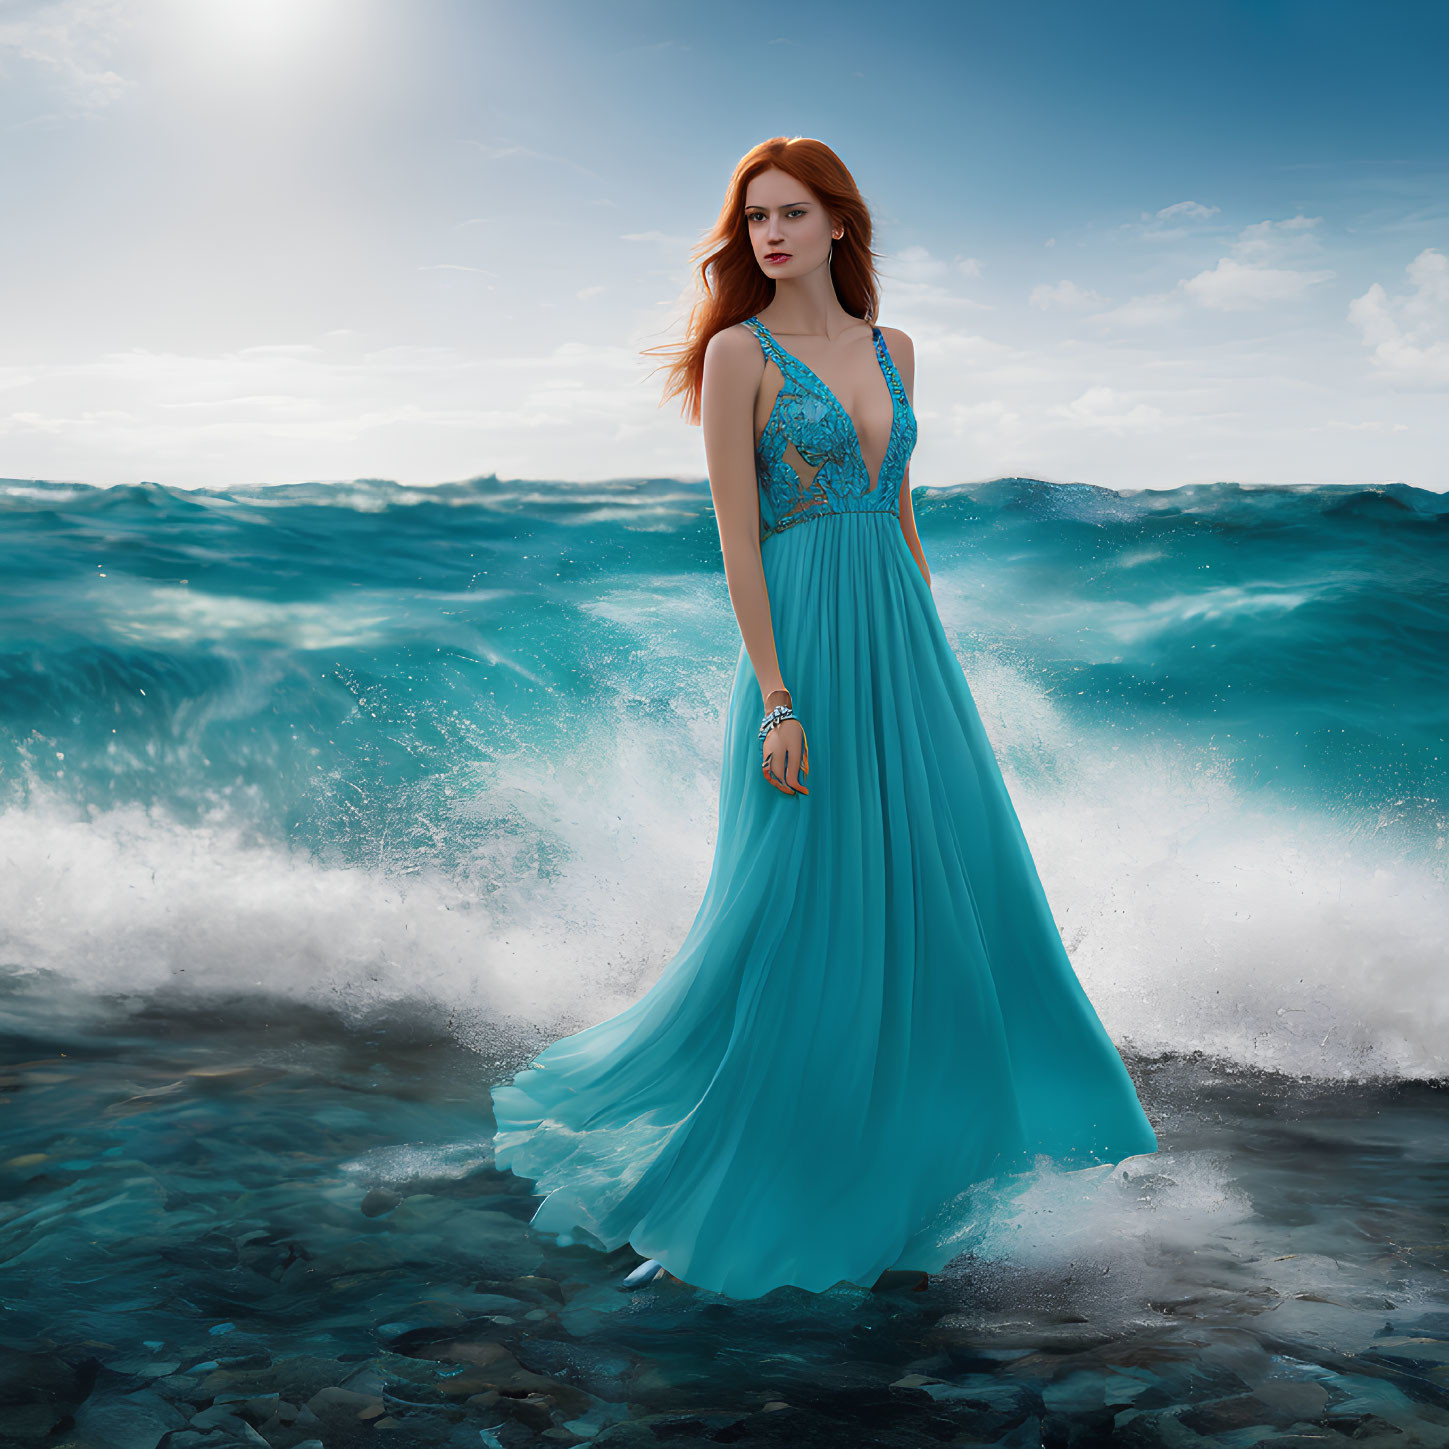 Woman in flowing blue dress amidst turbulent ocean waves under dramatic sky